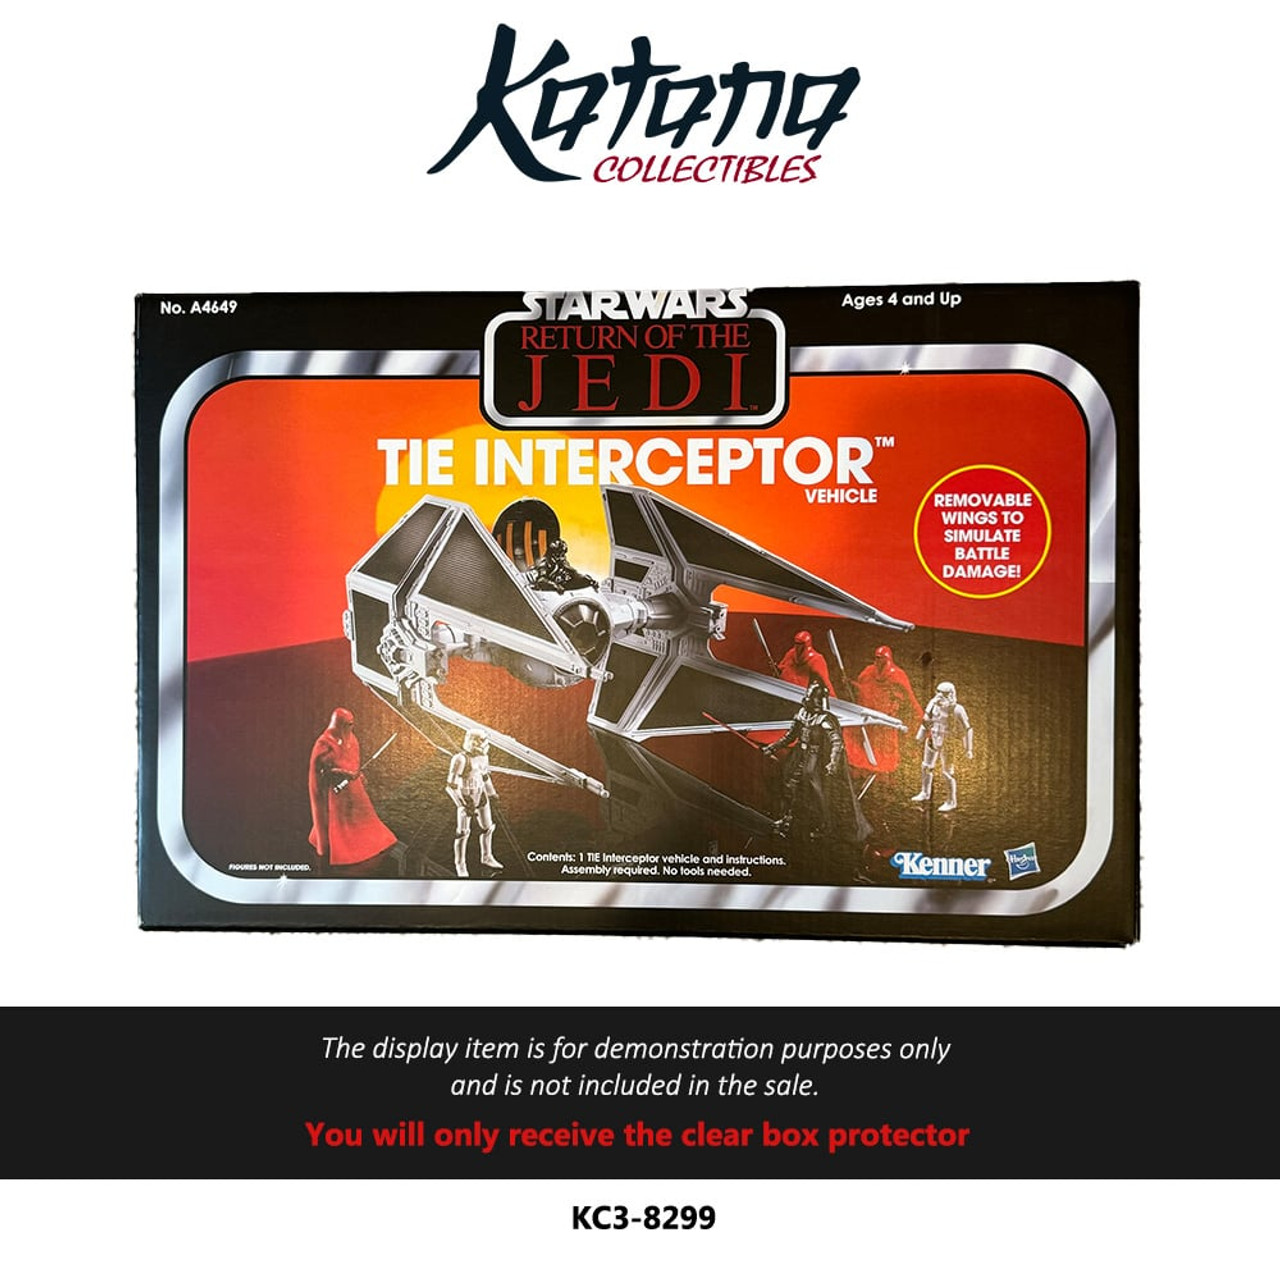 Katana Collectibles Protector For Star Wars The Vintage Collection Tie Interceptor (2013 Amazon Exclusive)